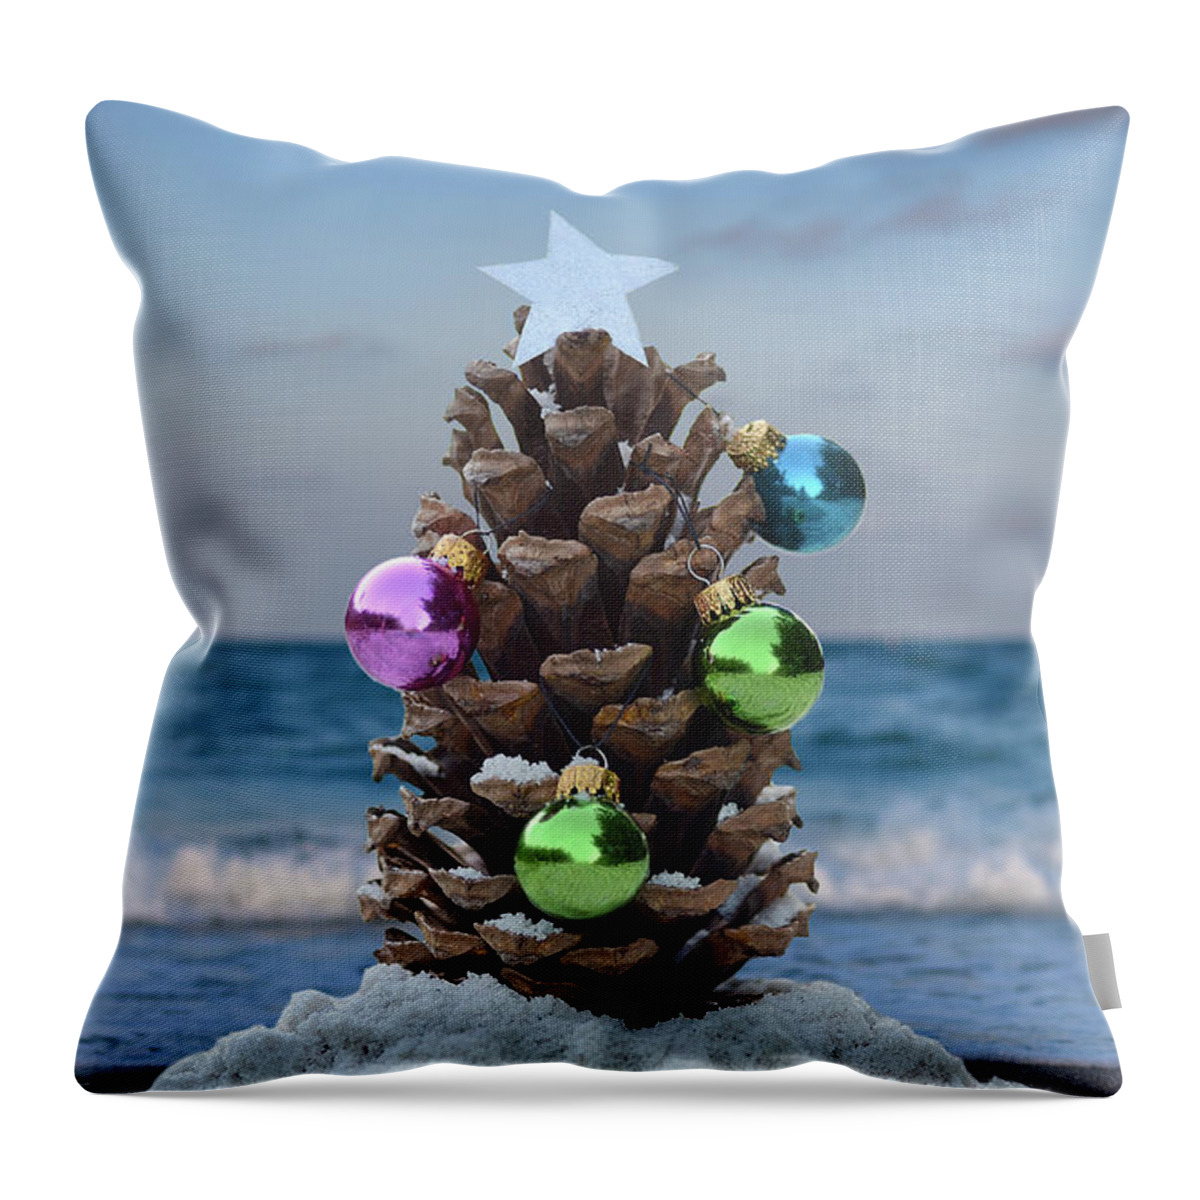 Christmas Throw Pillow featuring the photograph Wish You Were Here by Laura Fasulo